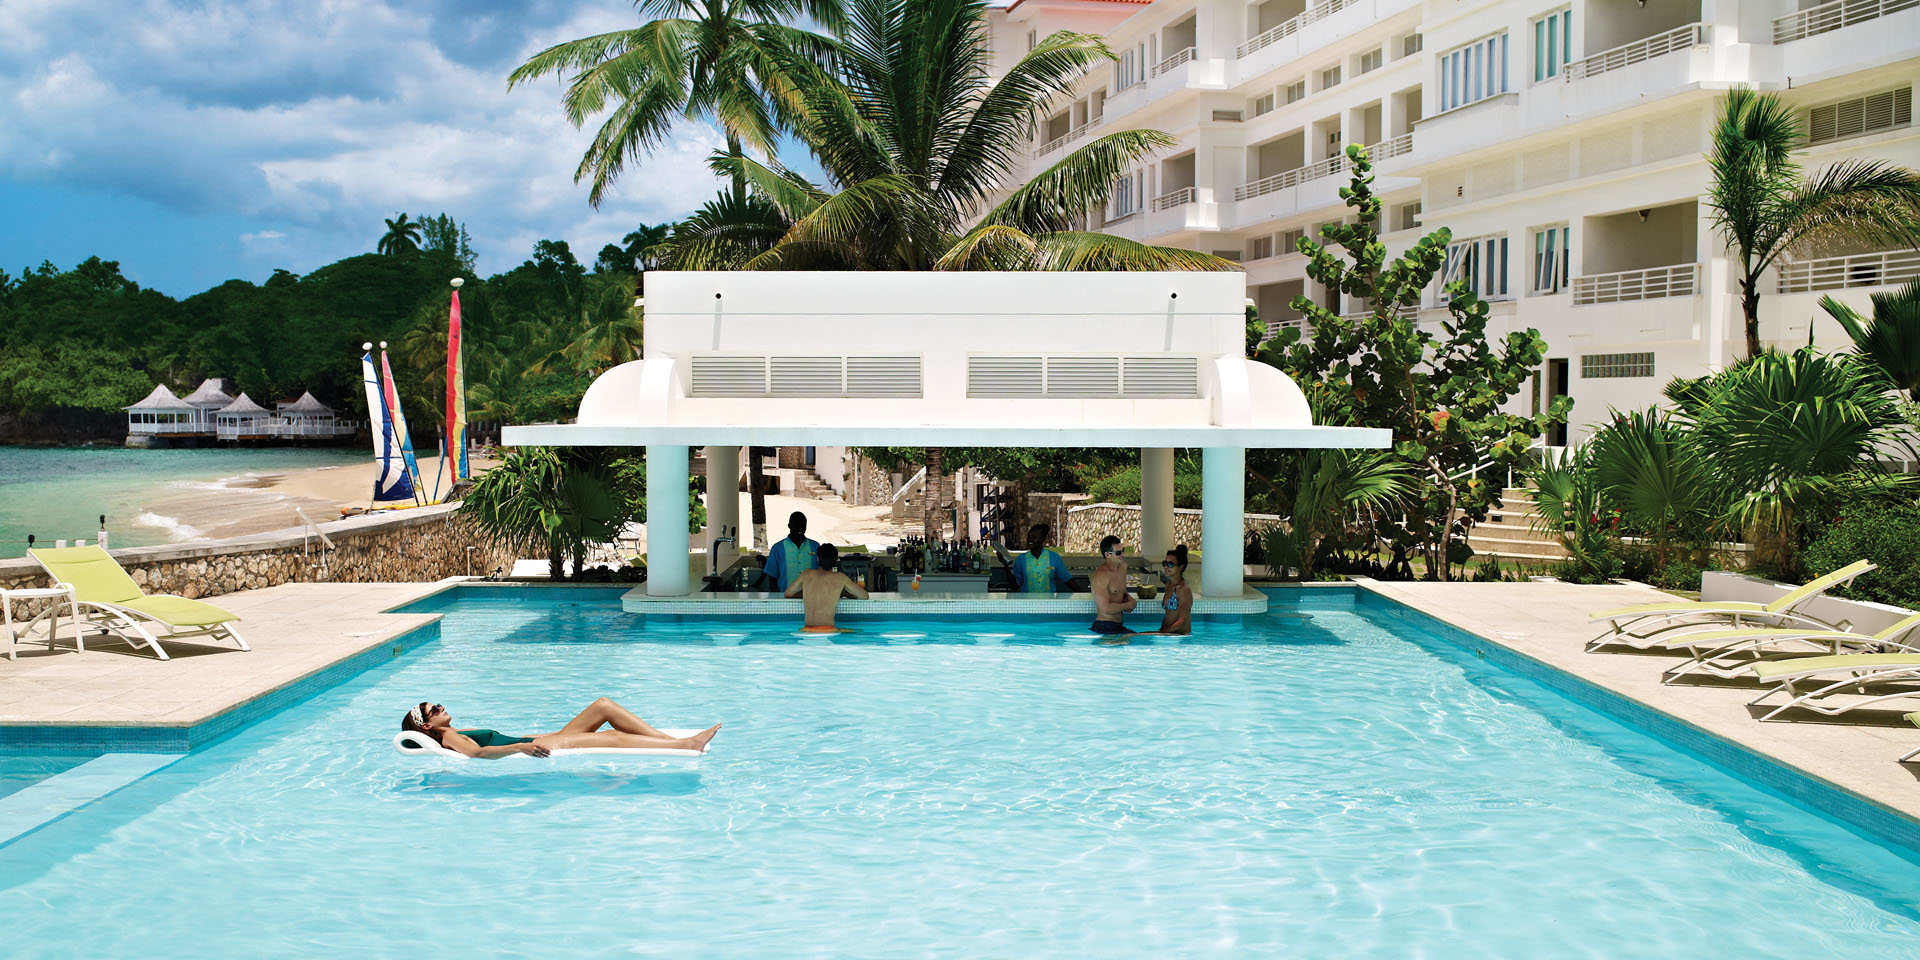 All Inclusive Holidays to Jamaica 2020 - Couples Resorts